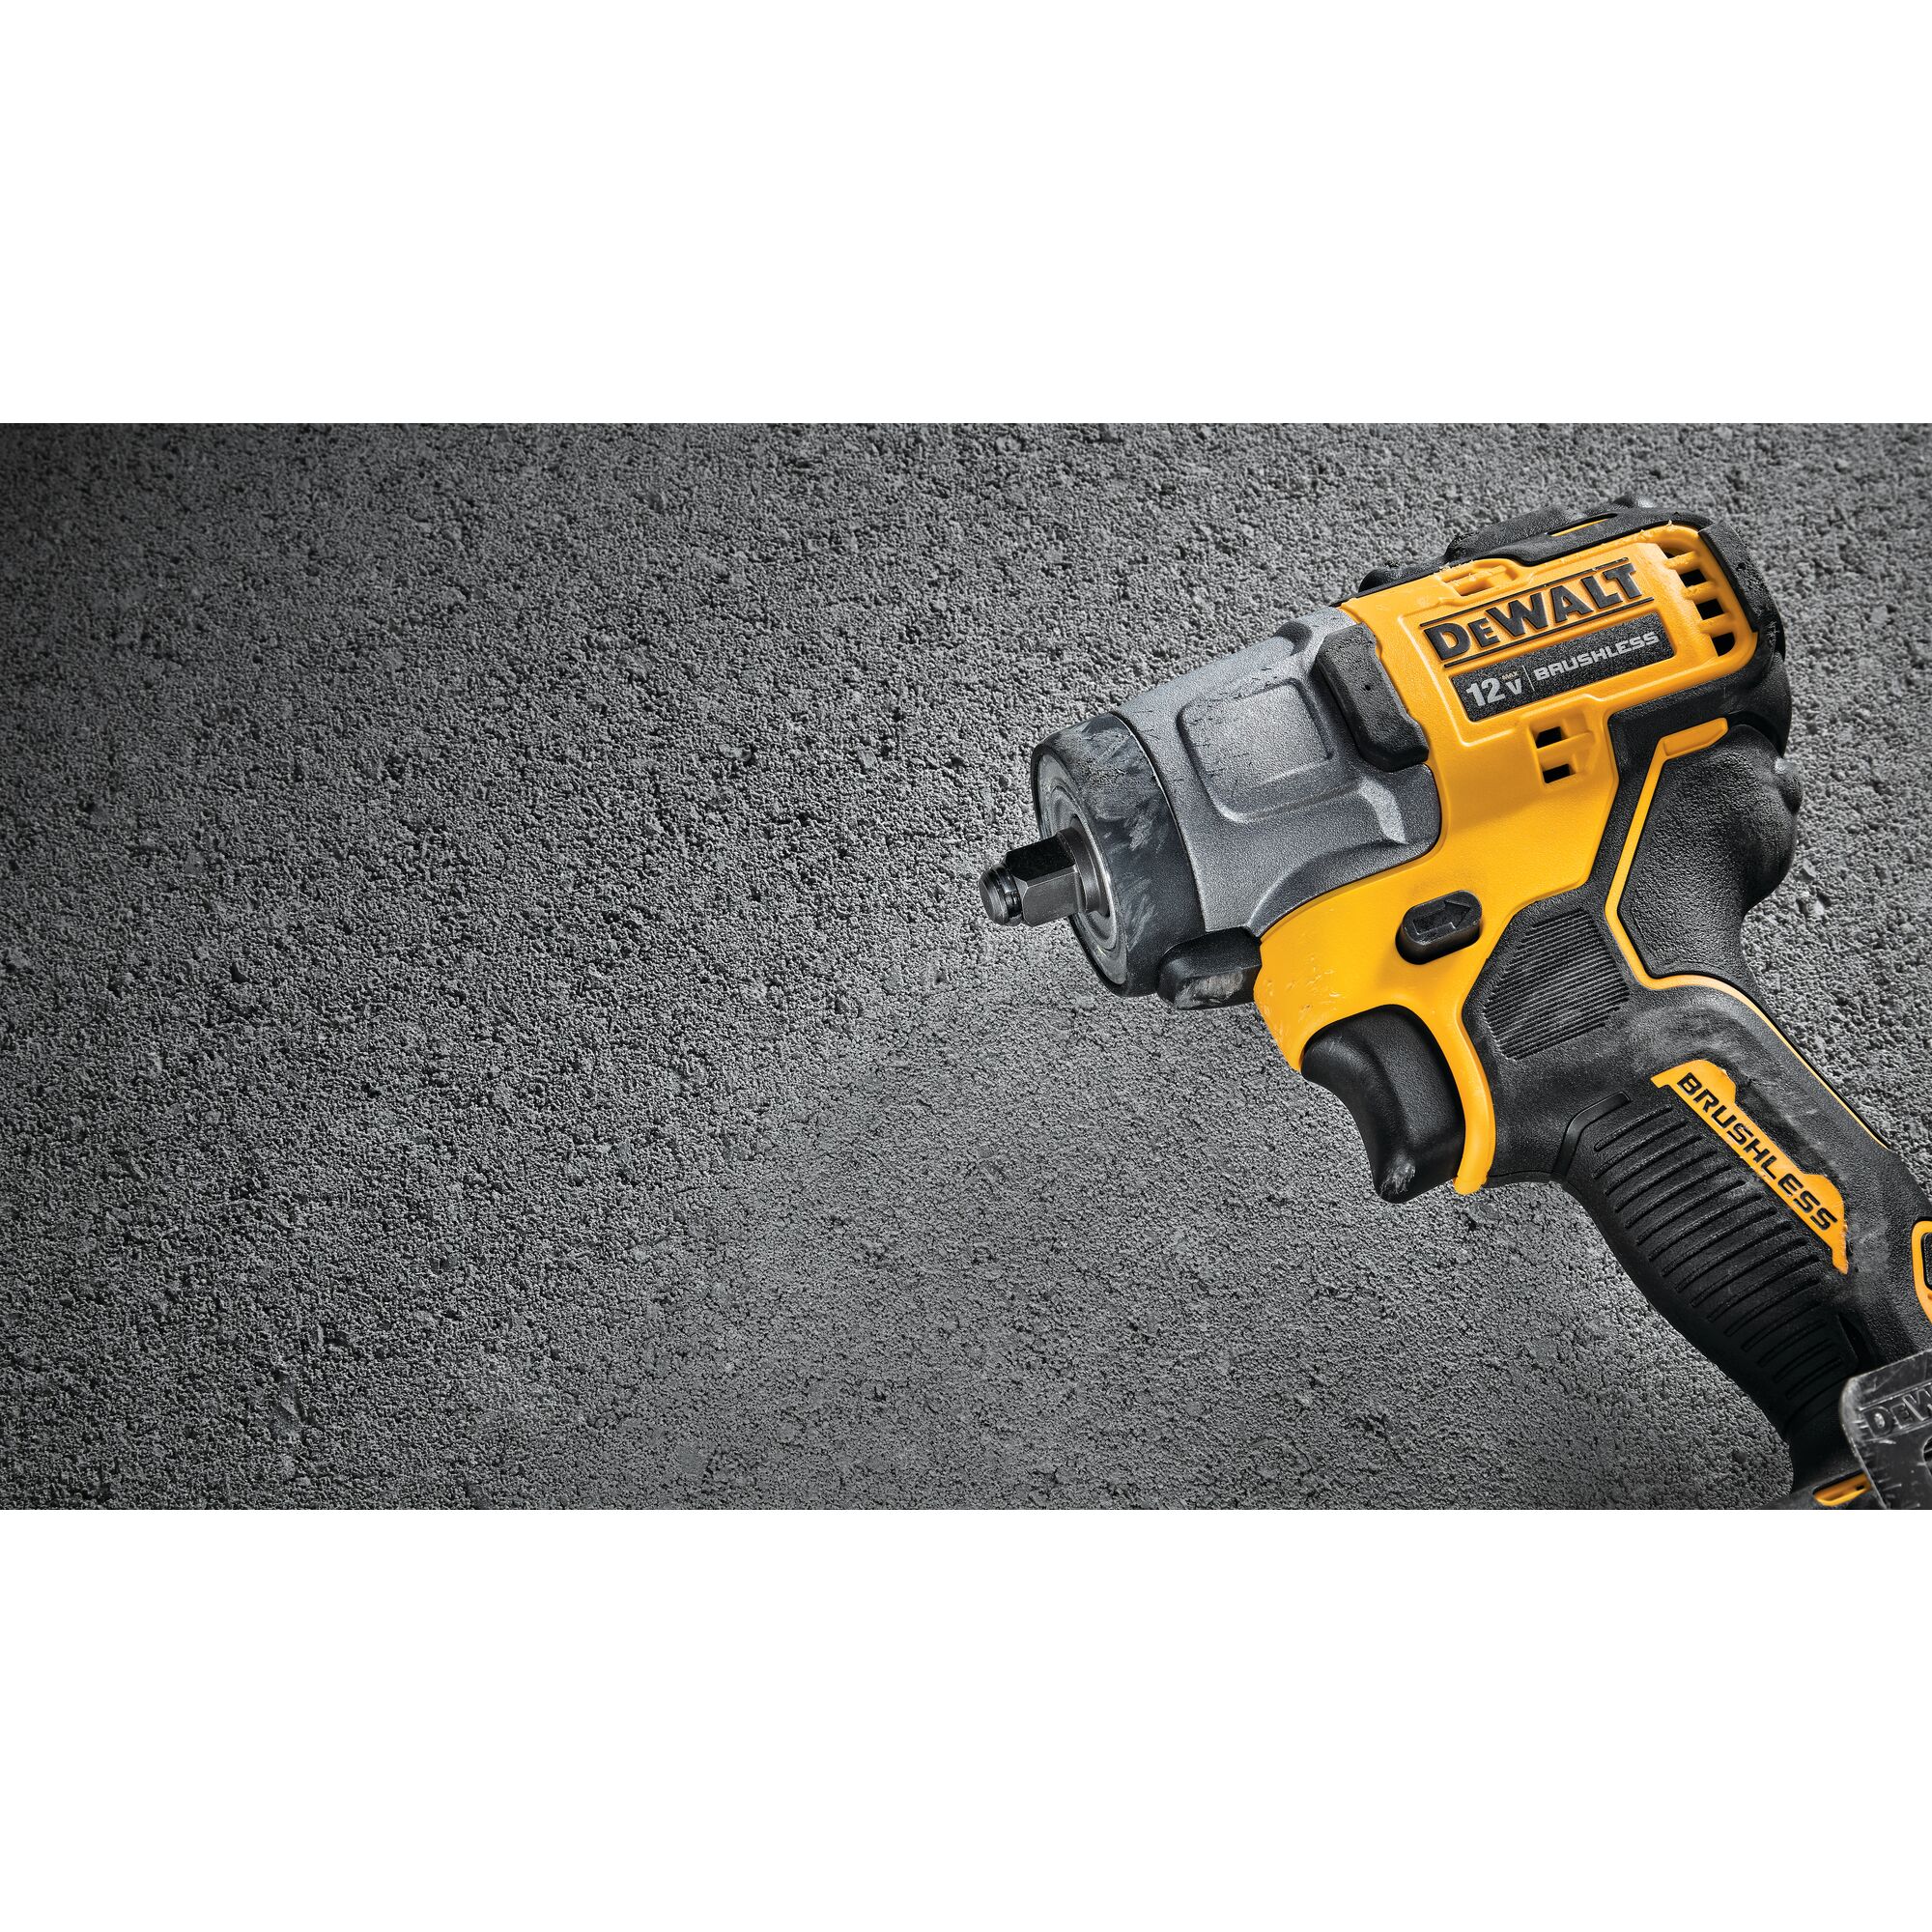 Cordless Impact Wrench with Accessories for sale online DEWALT XTREME DCF902F2 12V MAX Brushless 3/8in 